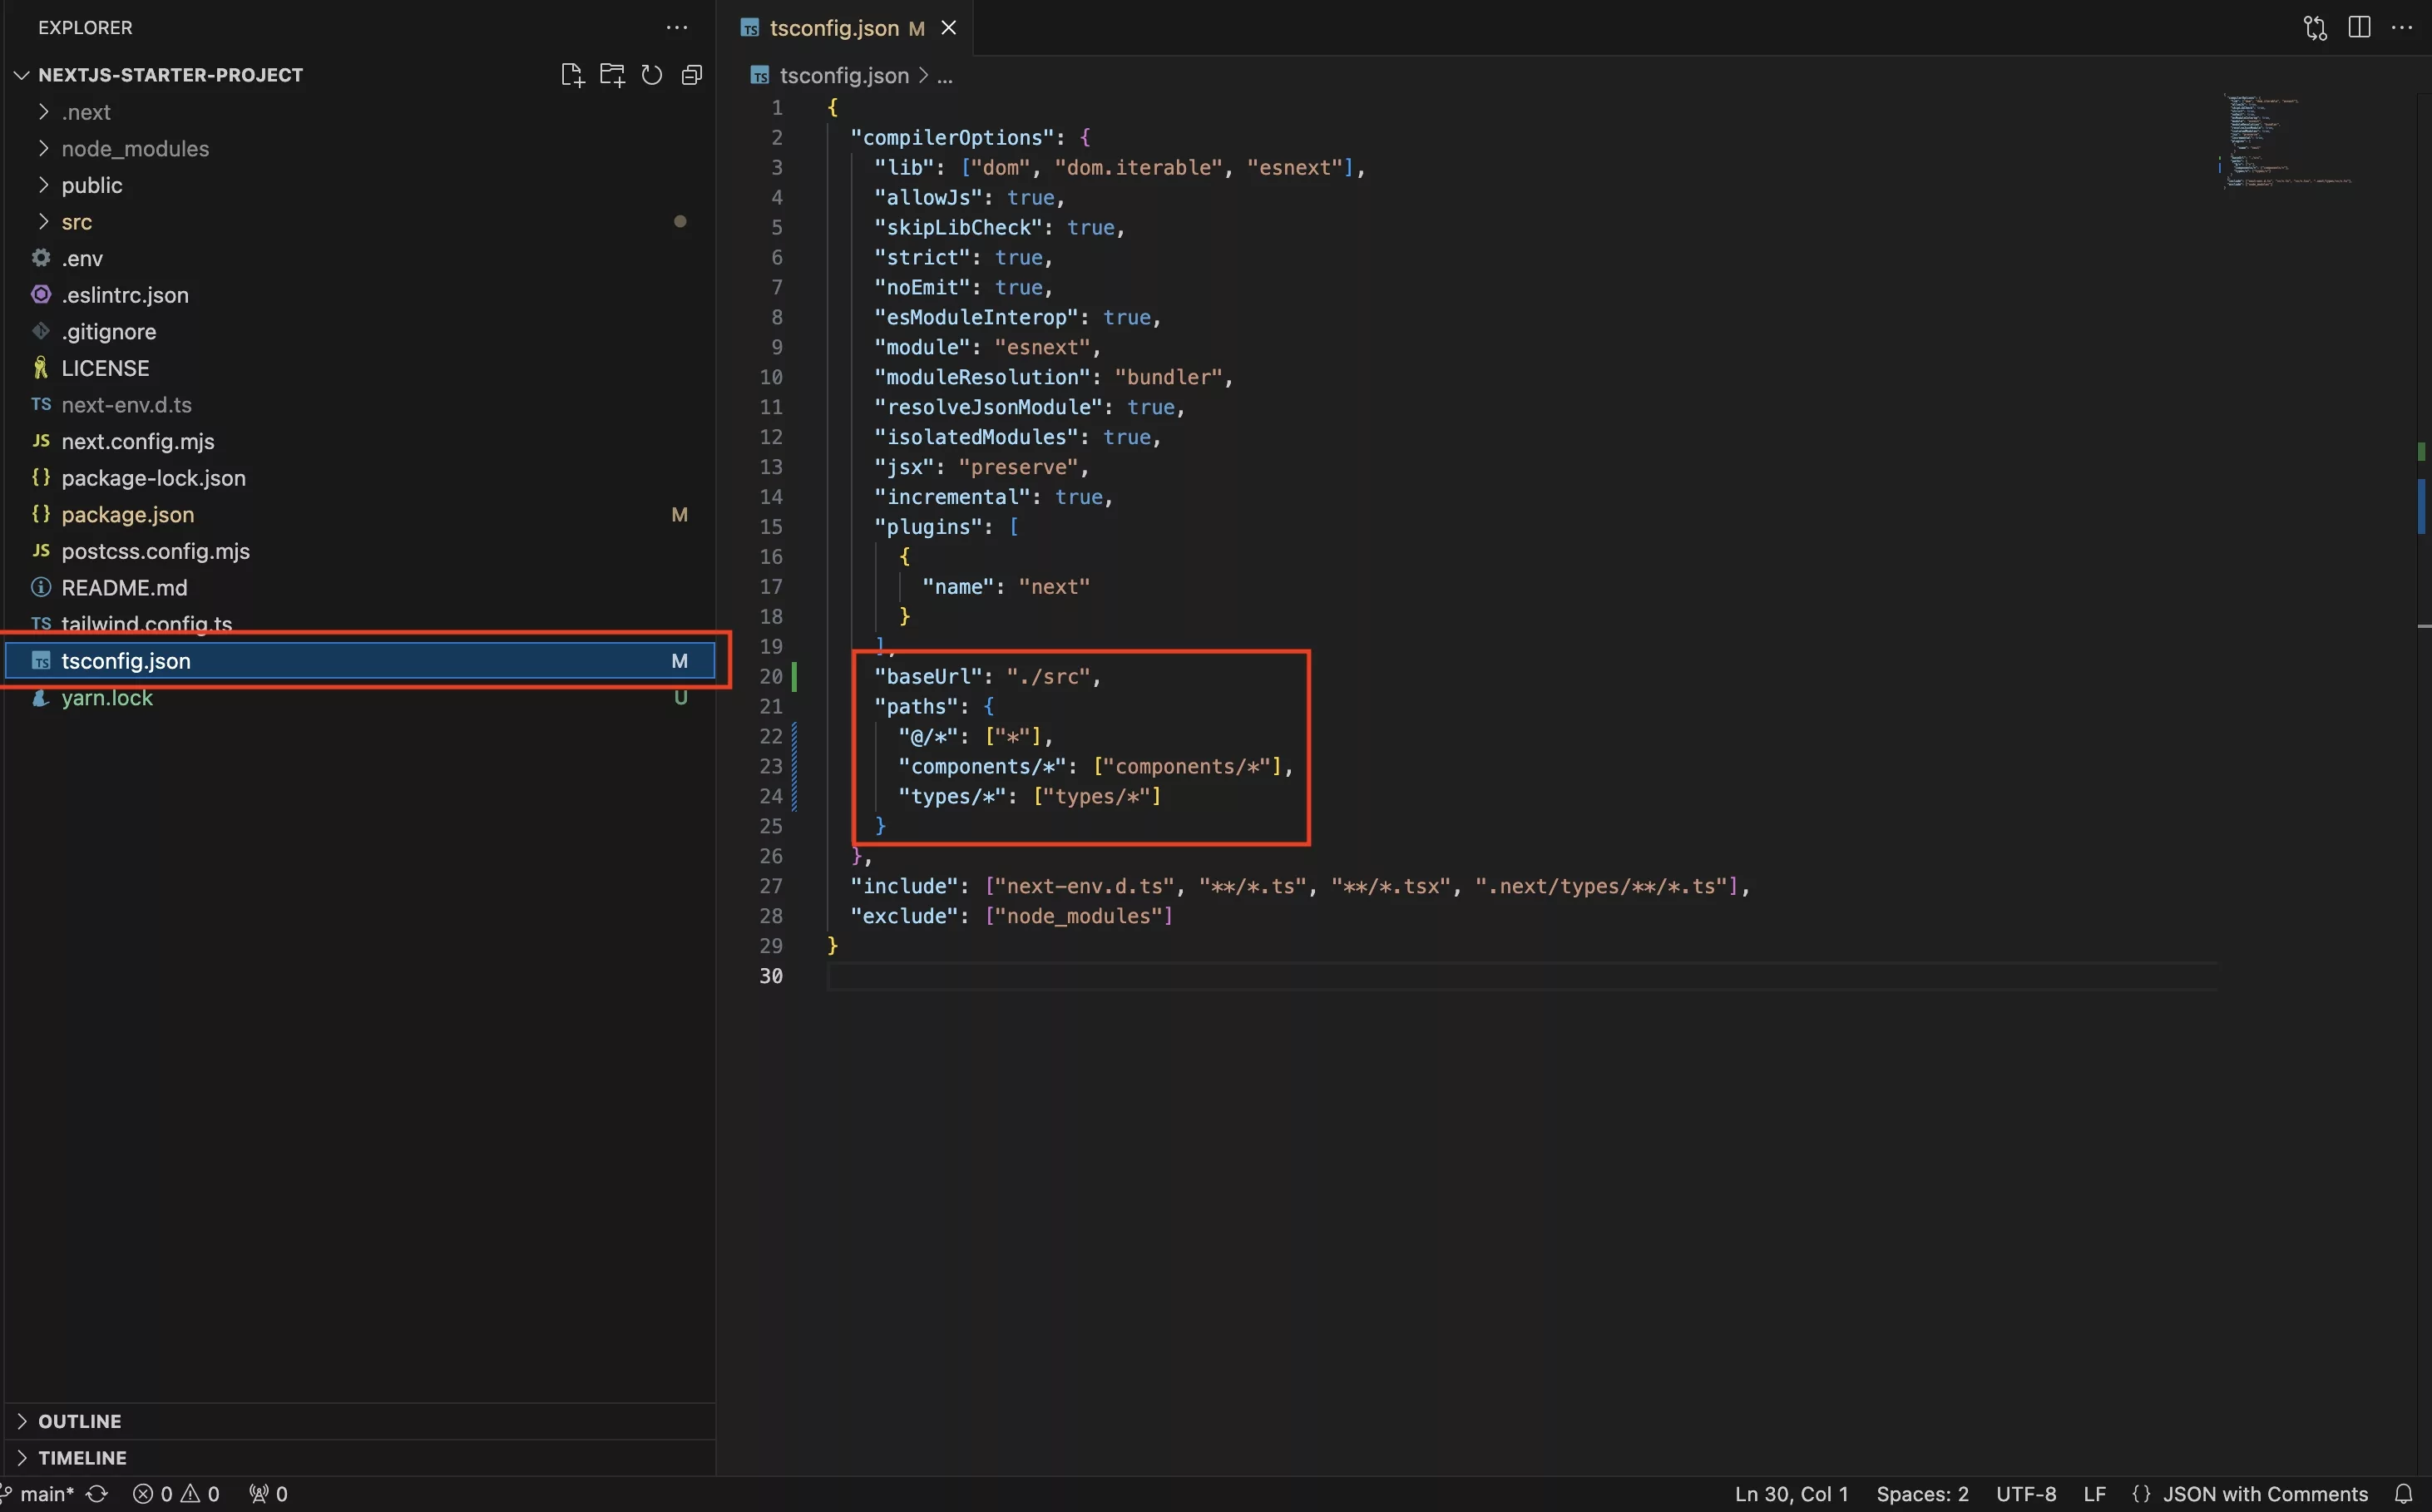 A screenshot of VSCode highlighting the changes we made to the tsconfig.json file. Code snippet available below.